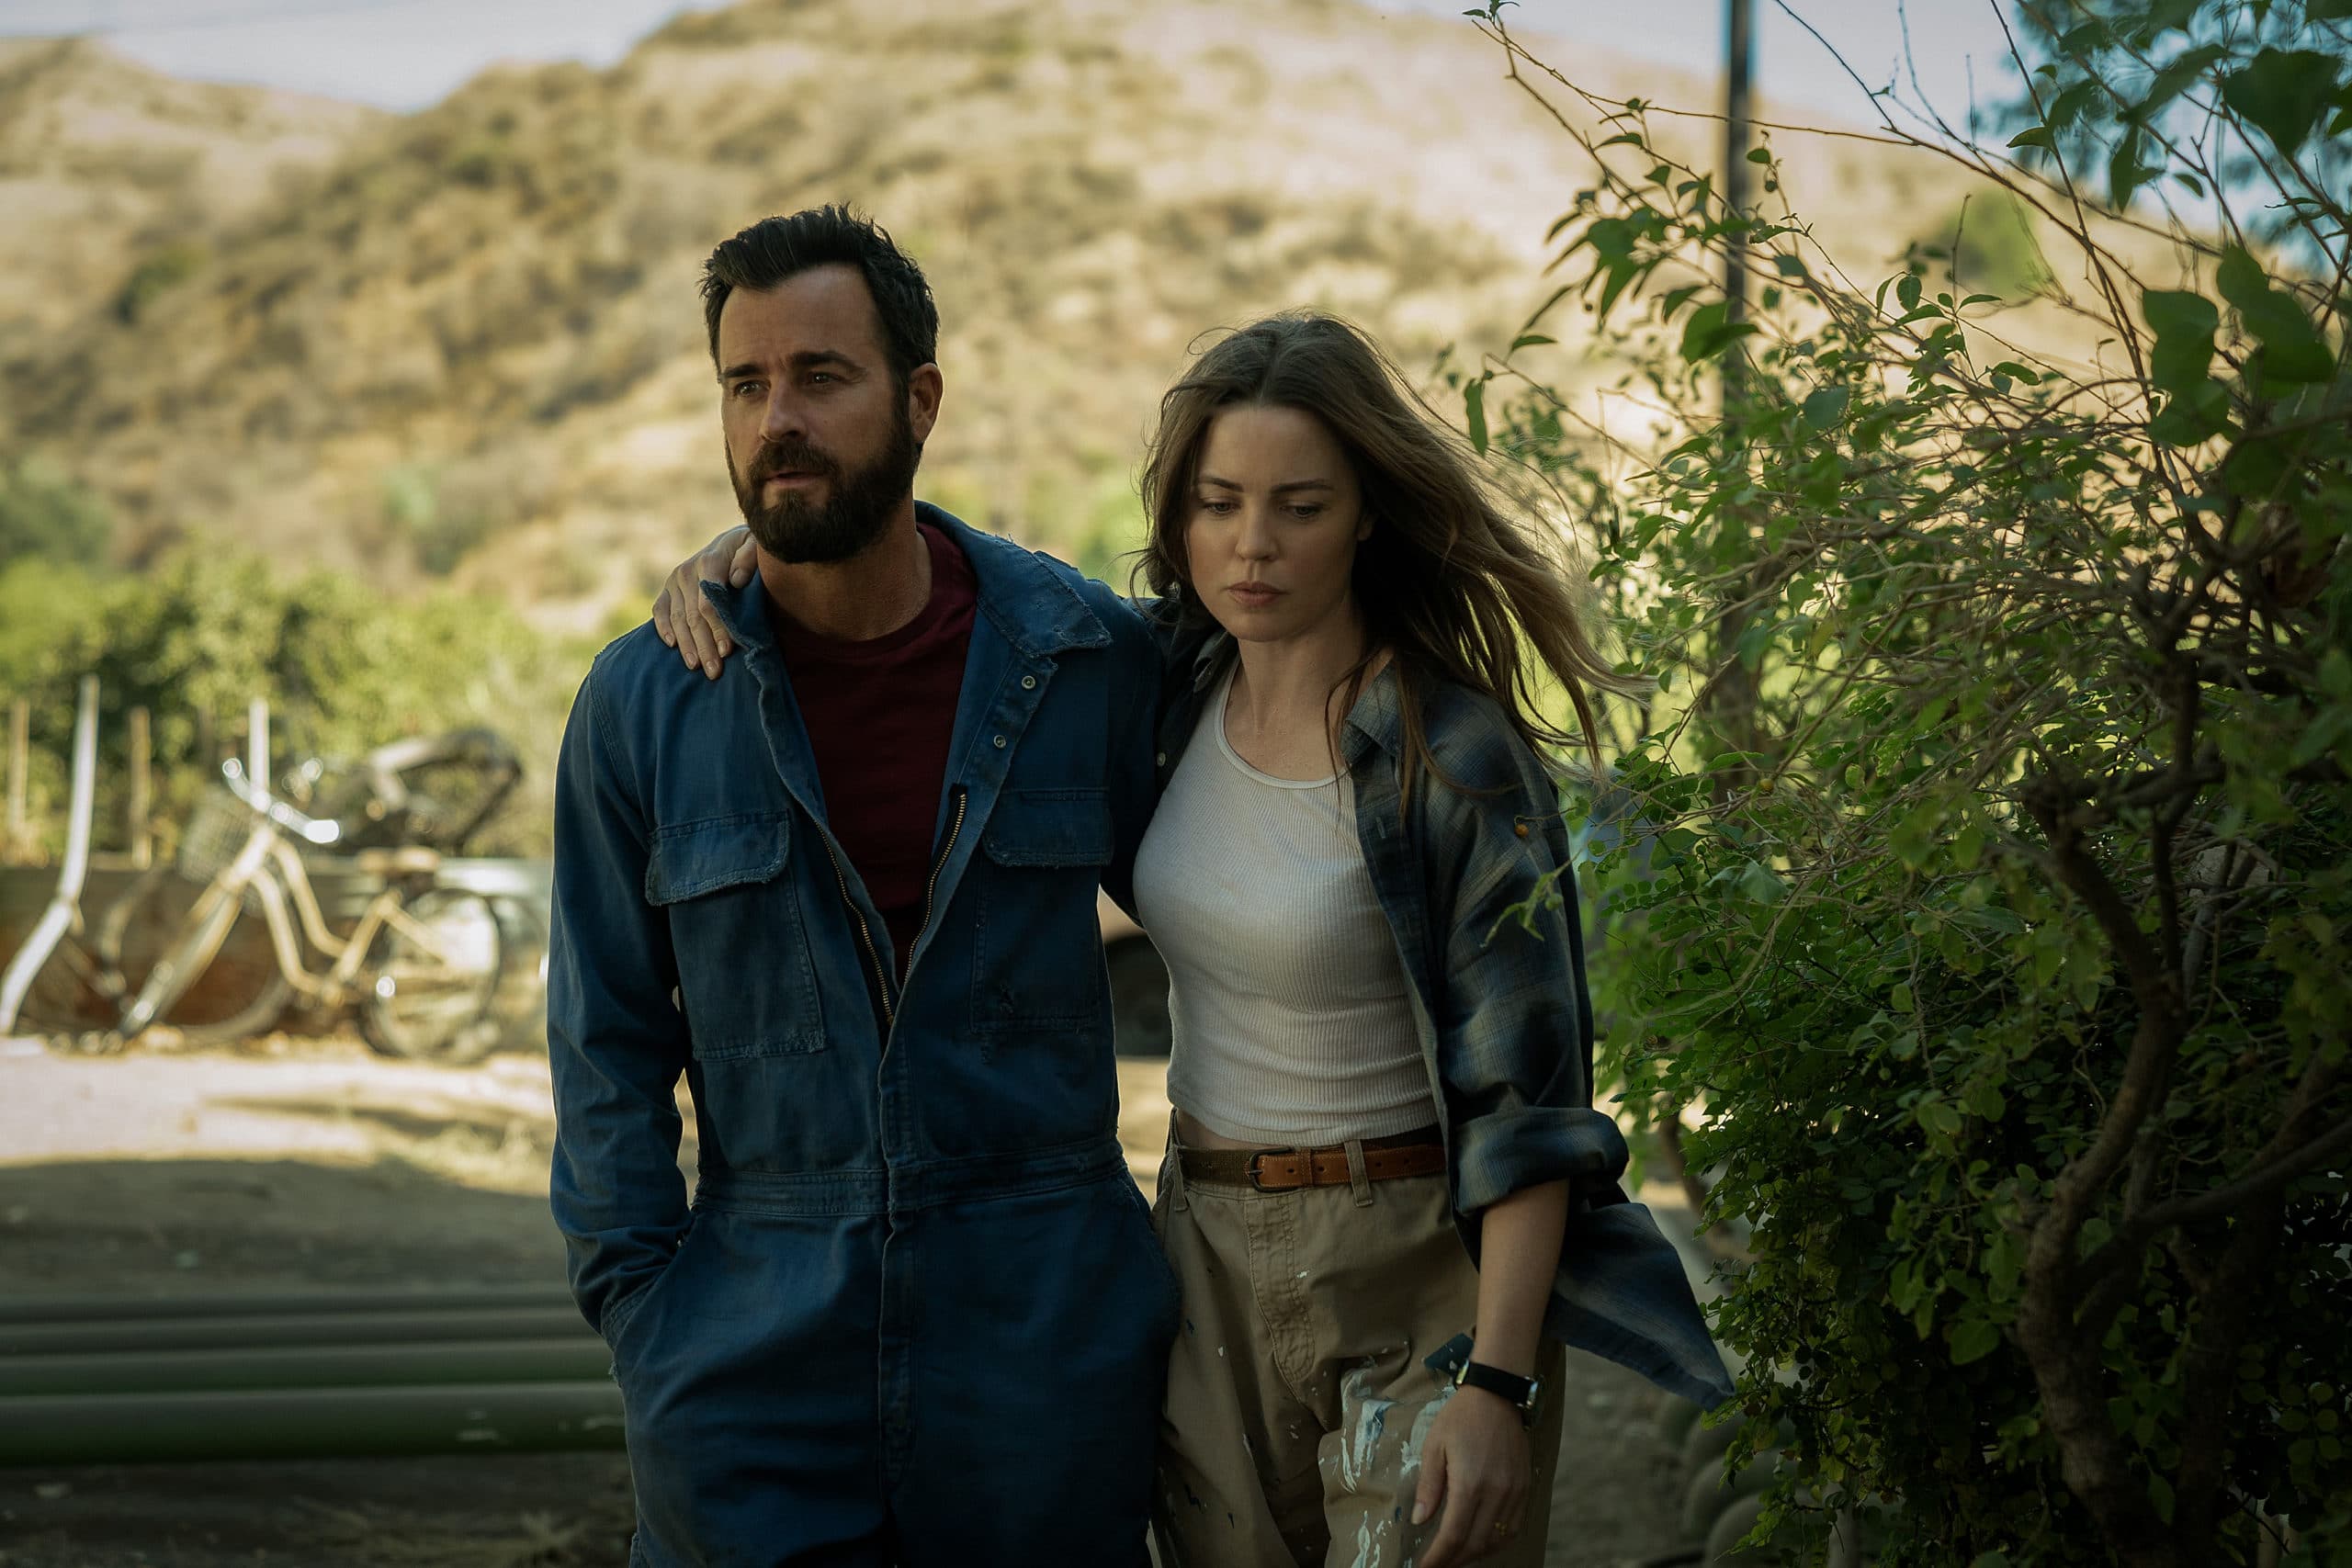 Episode 1. Justin Theroux and Melissa George in “The Mosquito Coast,” premiering April 30 on Apple TV+.